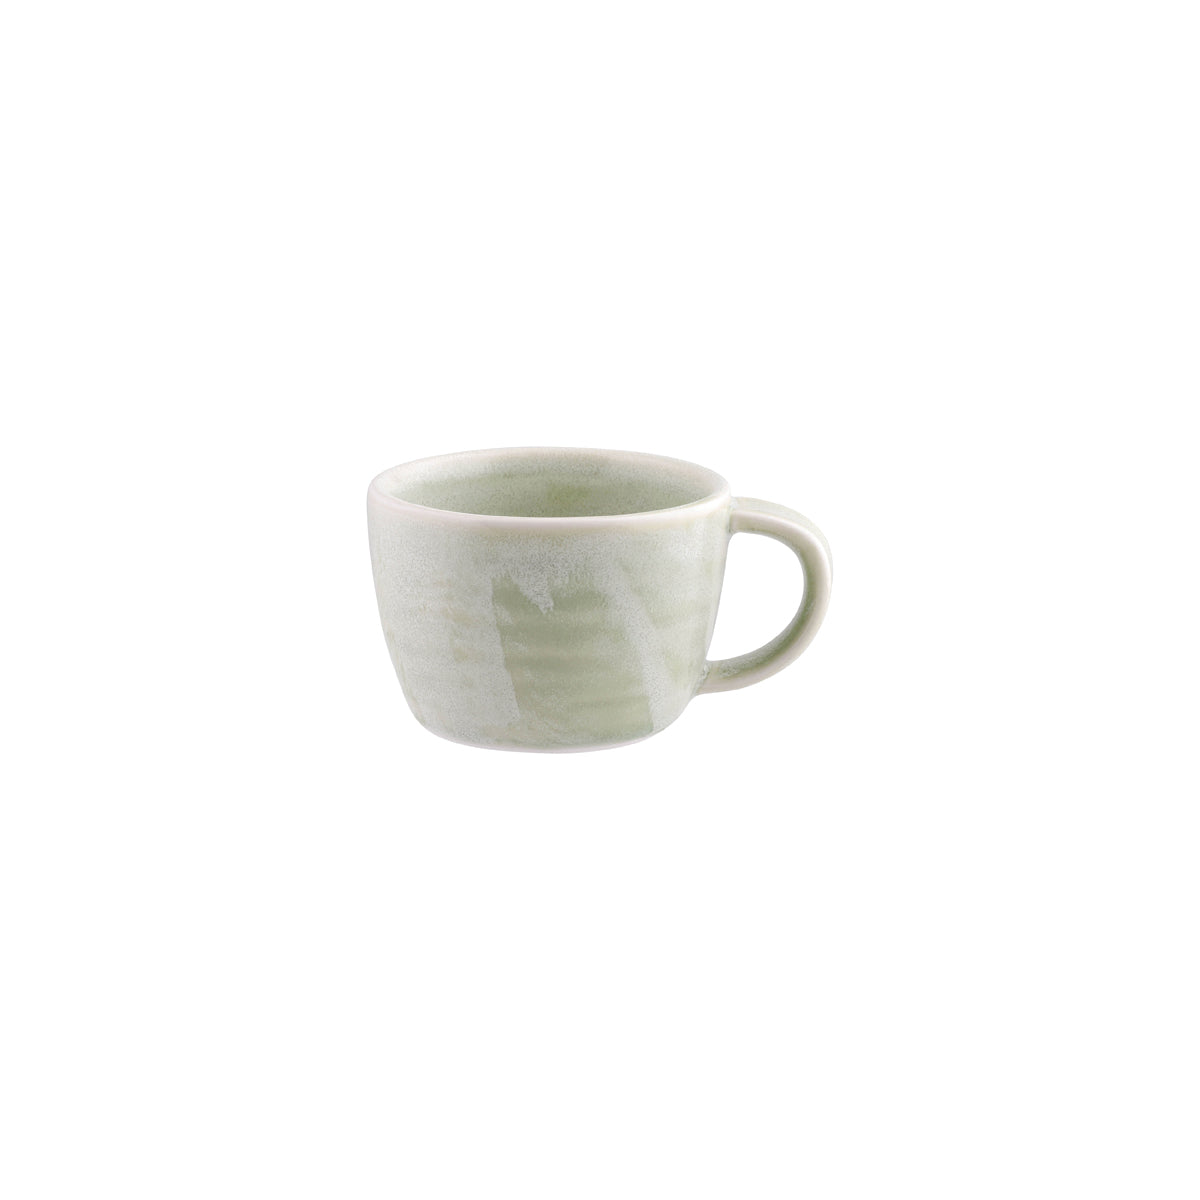 Coffee - Tea Cup - 200ml, Lush from Moda Porcelain. made out of Porcelain and sold in boxes of 6. Hospitality quality at wholesale price with The Flying Fork! 